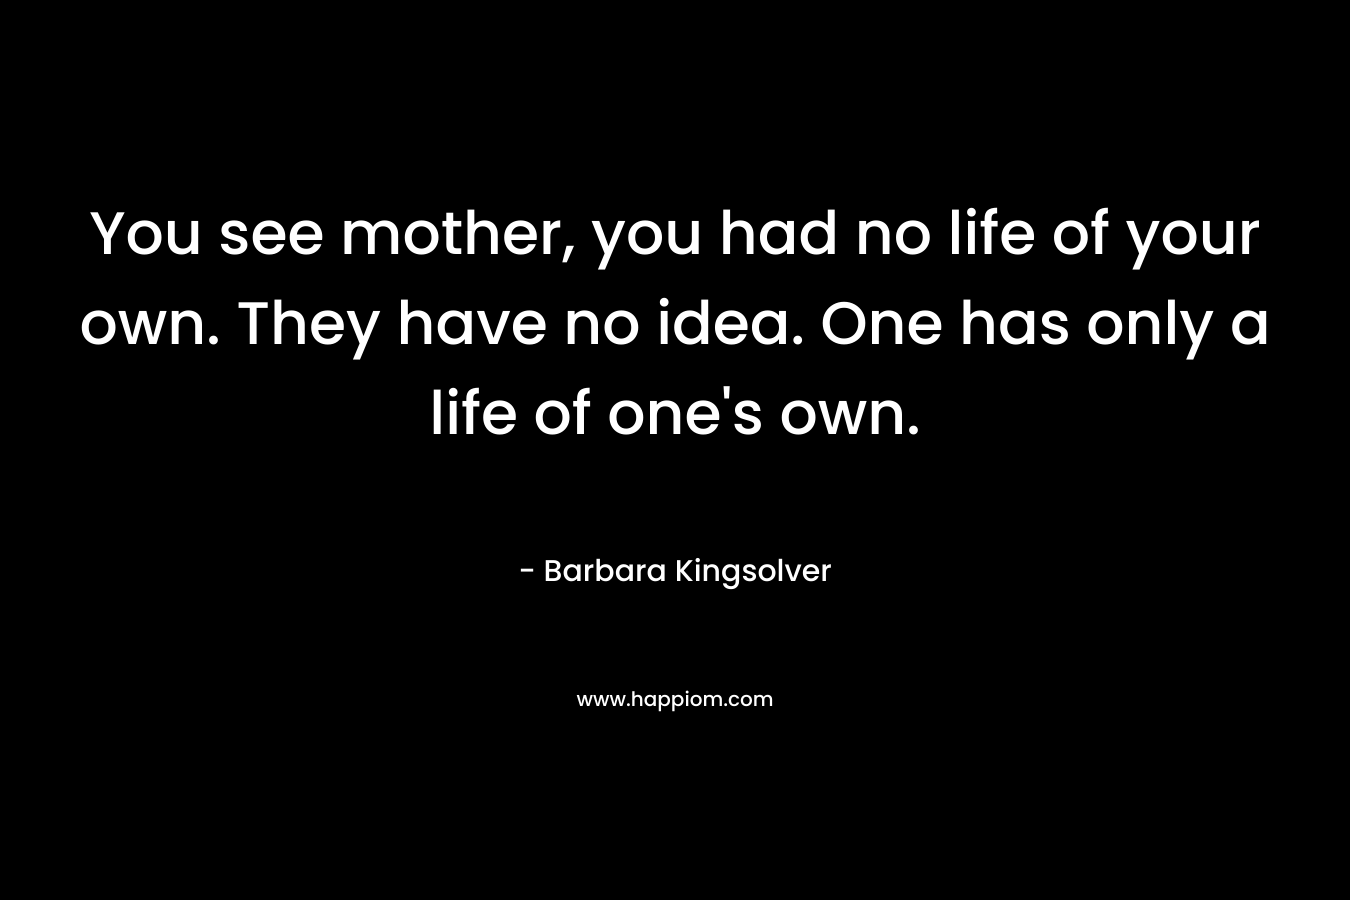 You see mother, you had no life of your own. They have no idea. One has only a life of one’s own. – Barbara Kingsolver